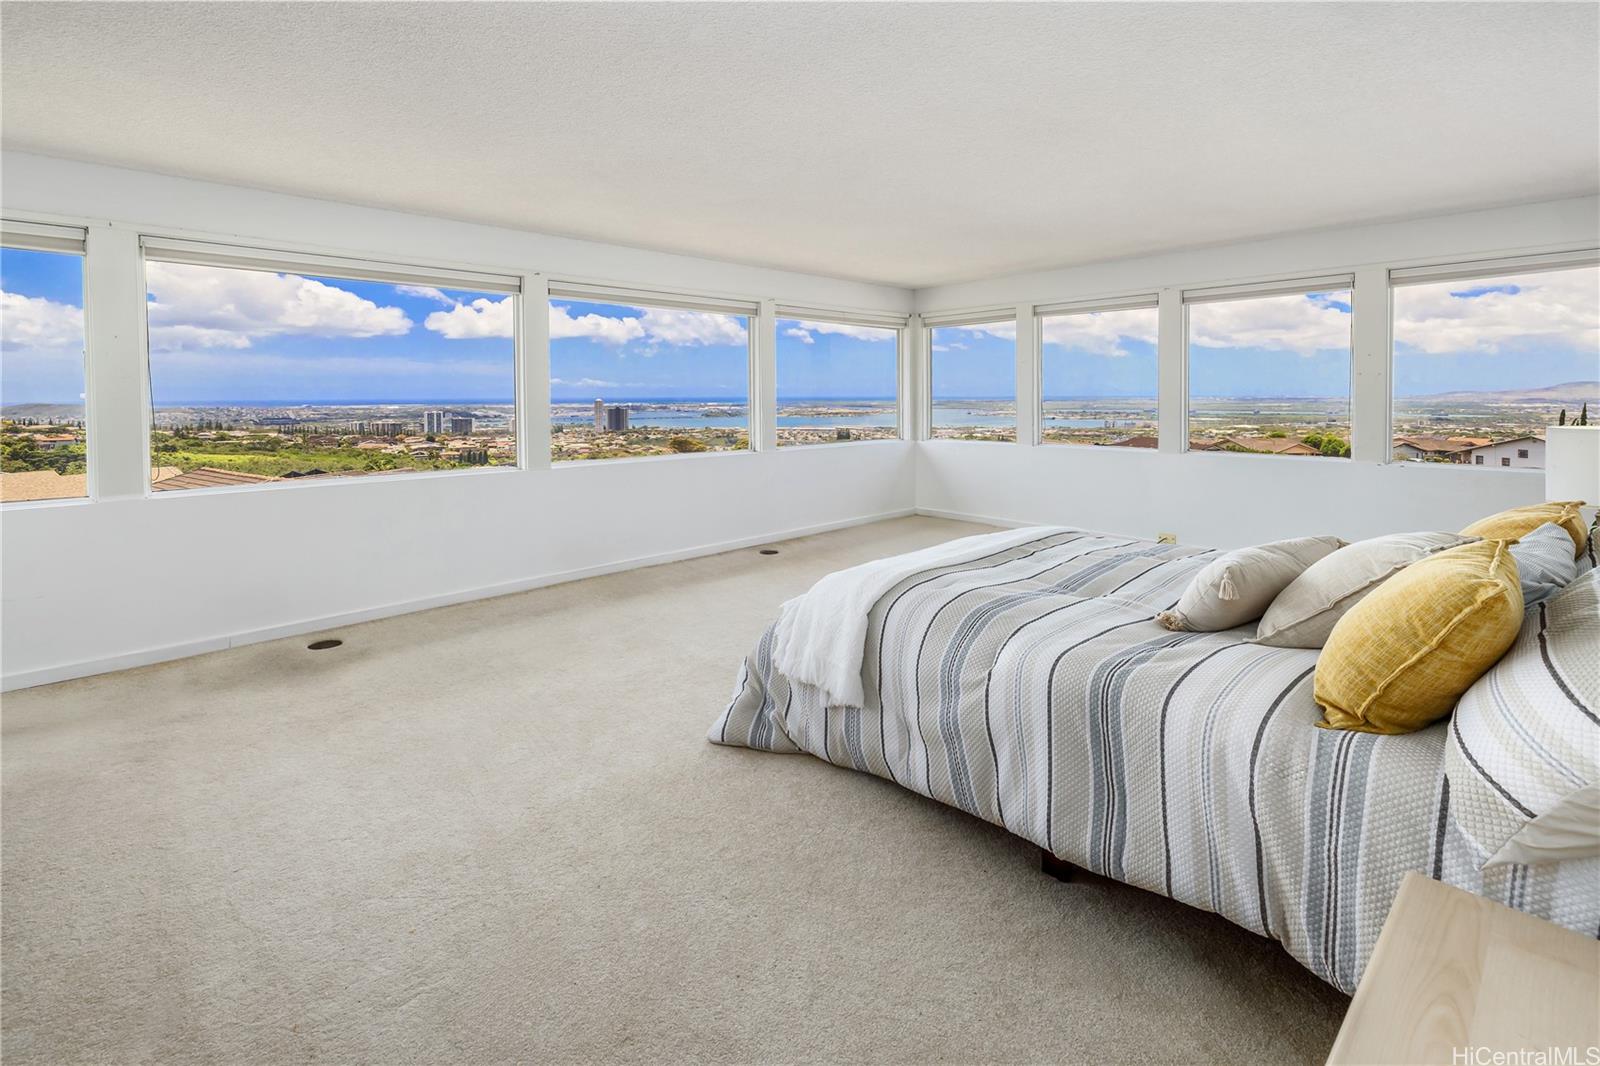 Upstairs Bedroom/Recreation area with AMAZING panoramic views.